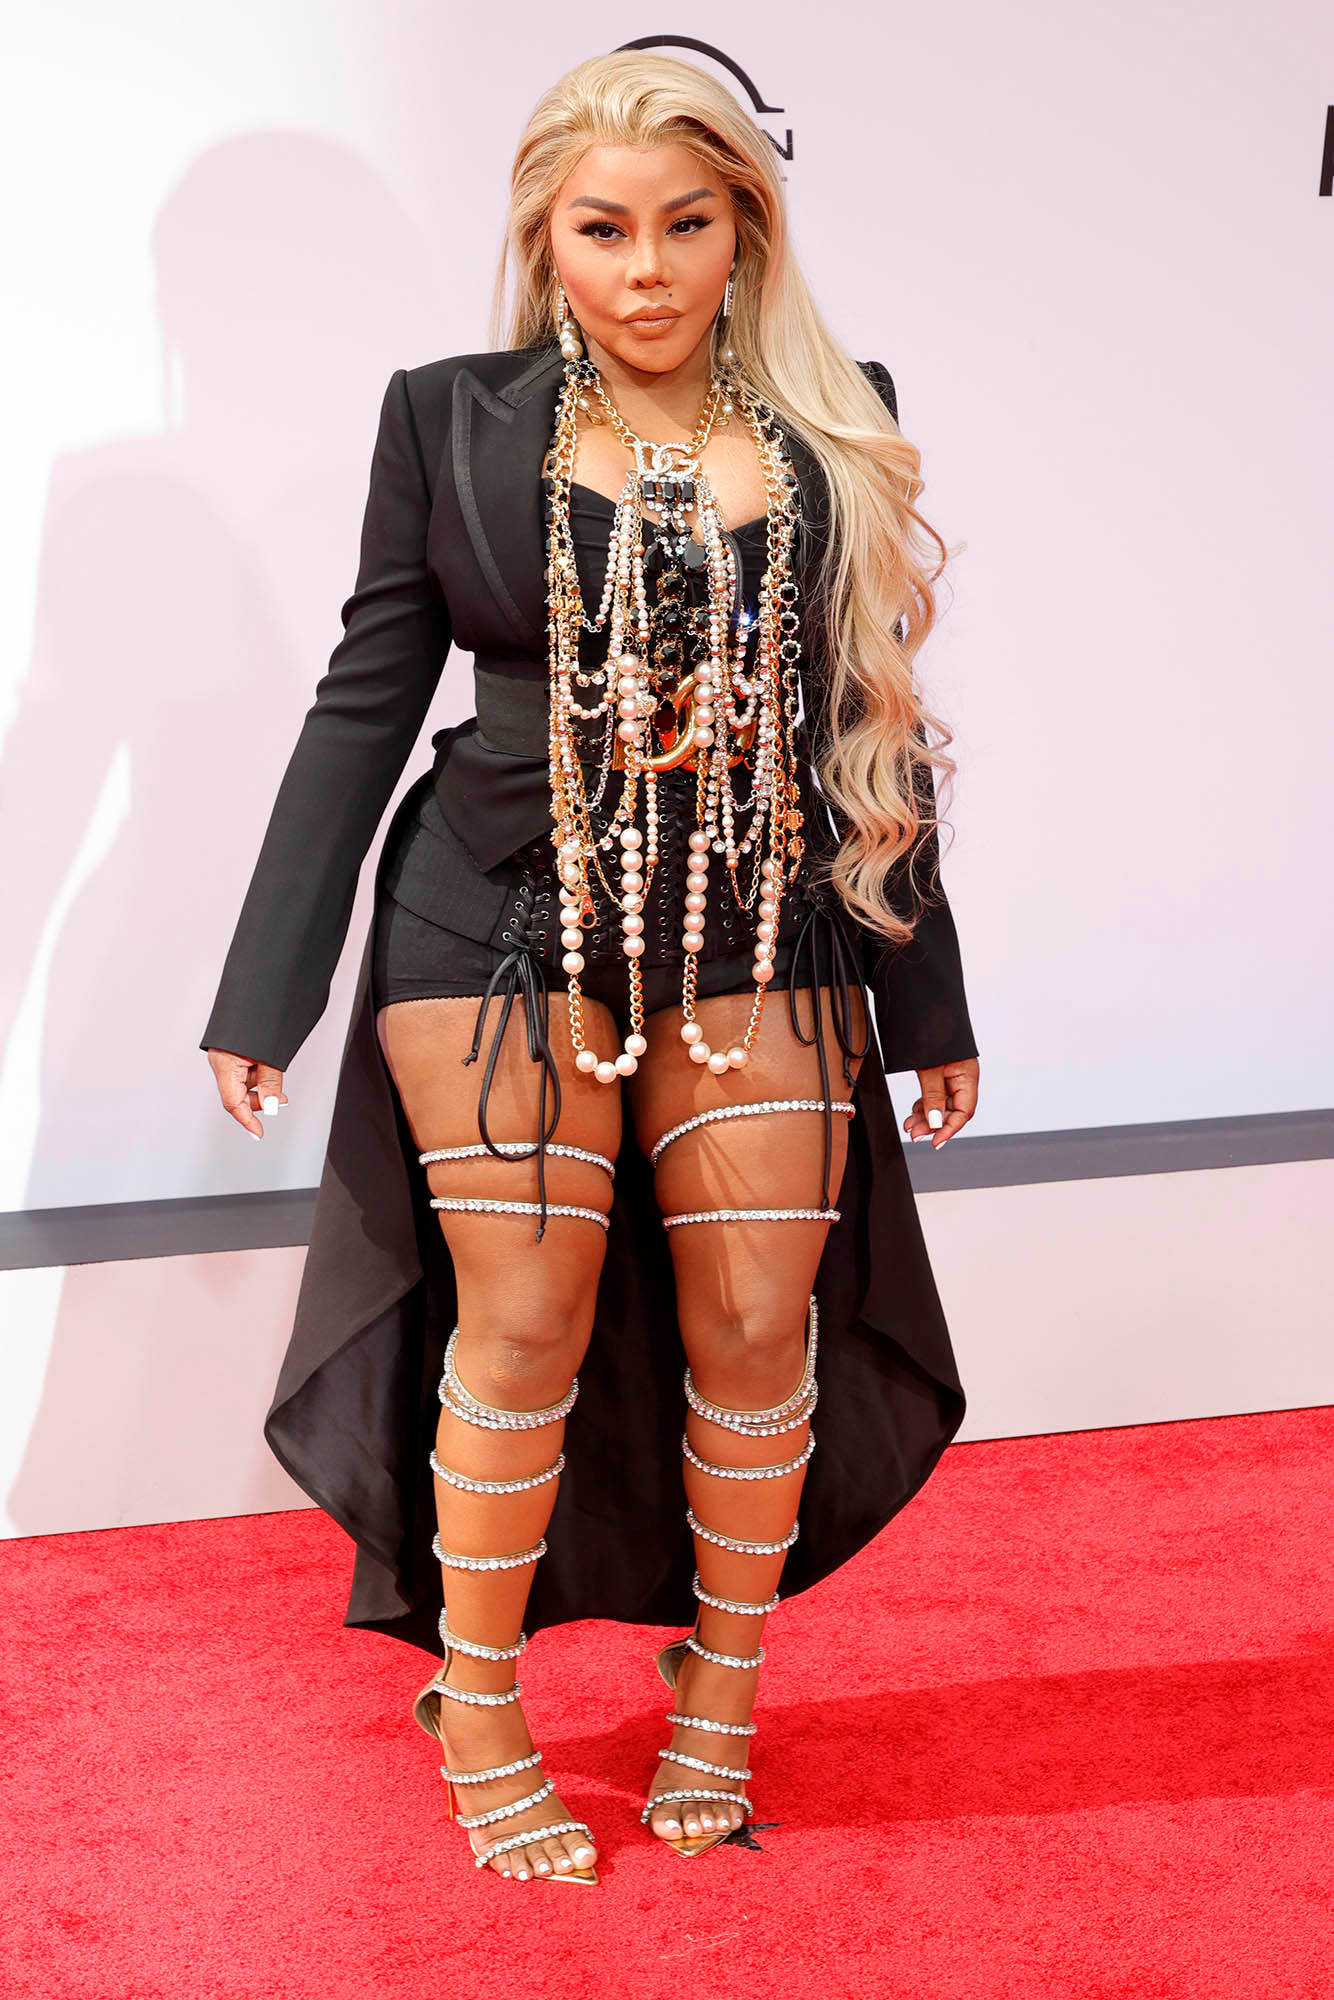 BET Awards 2021 red carpet All the celebrity fashion